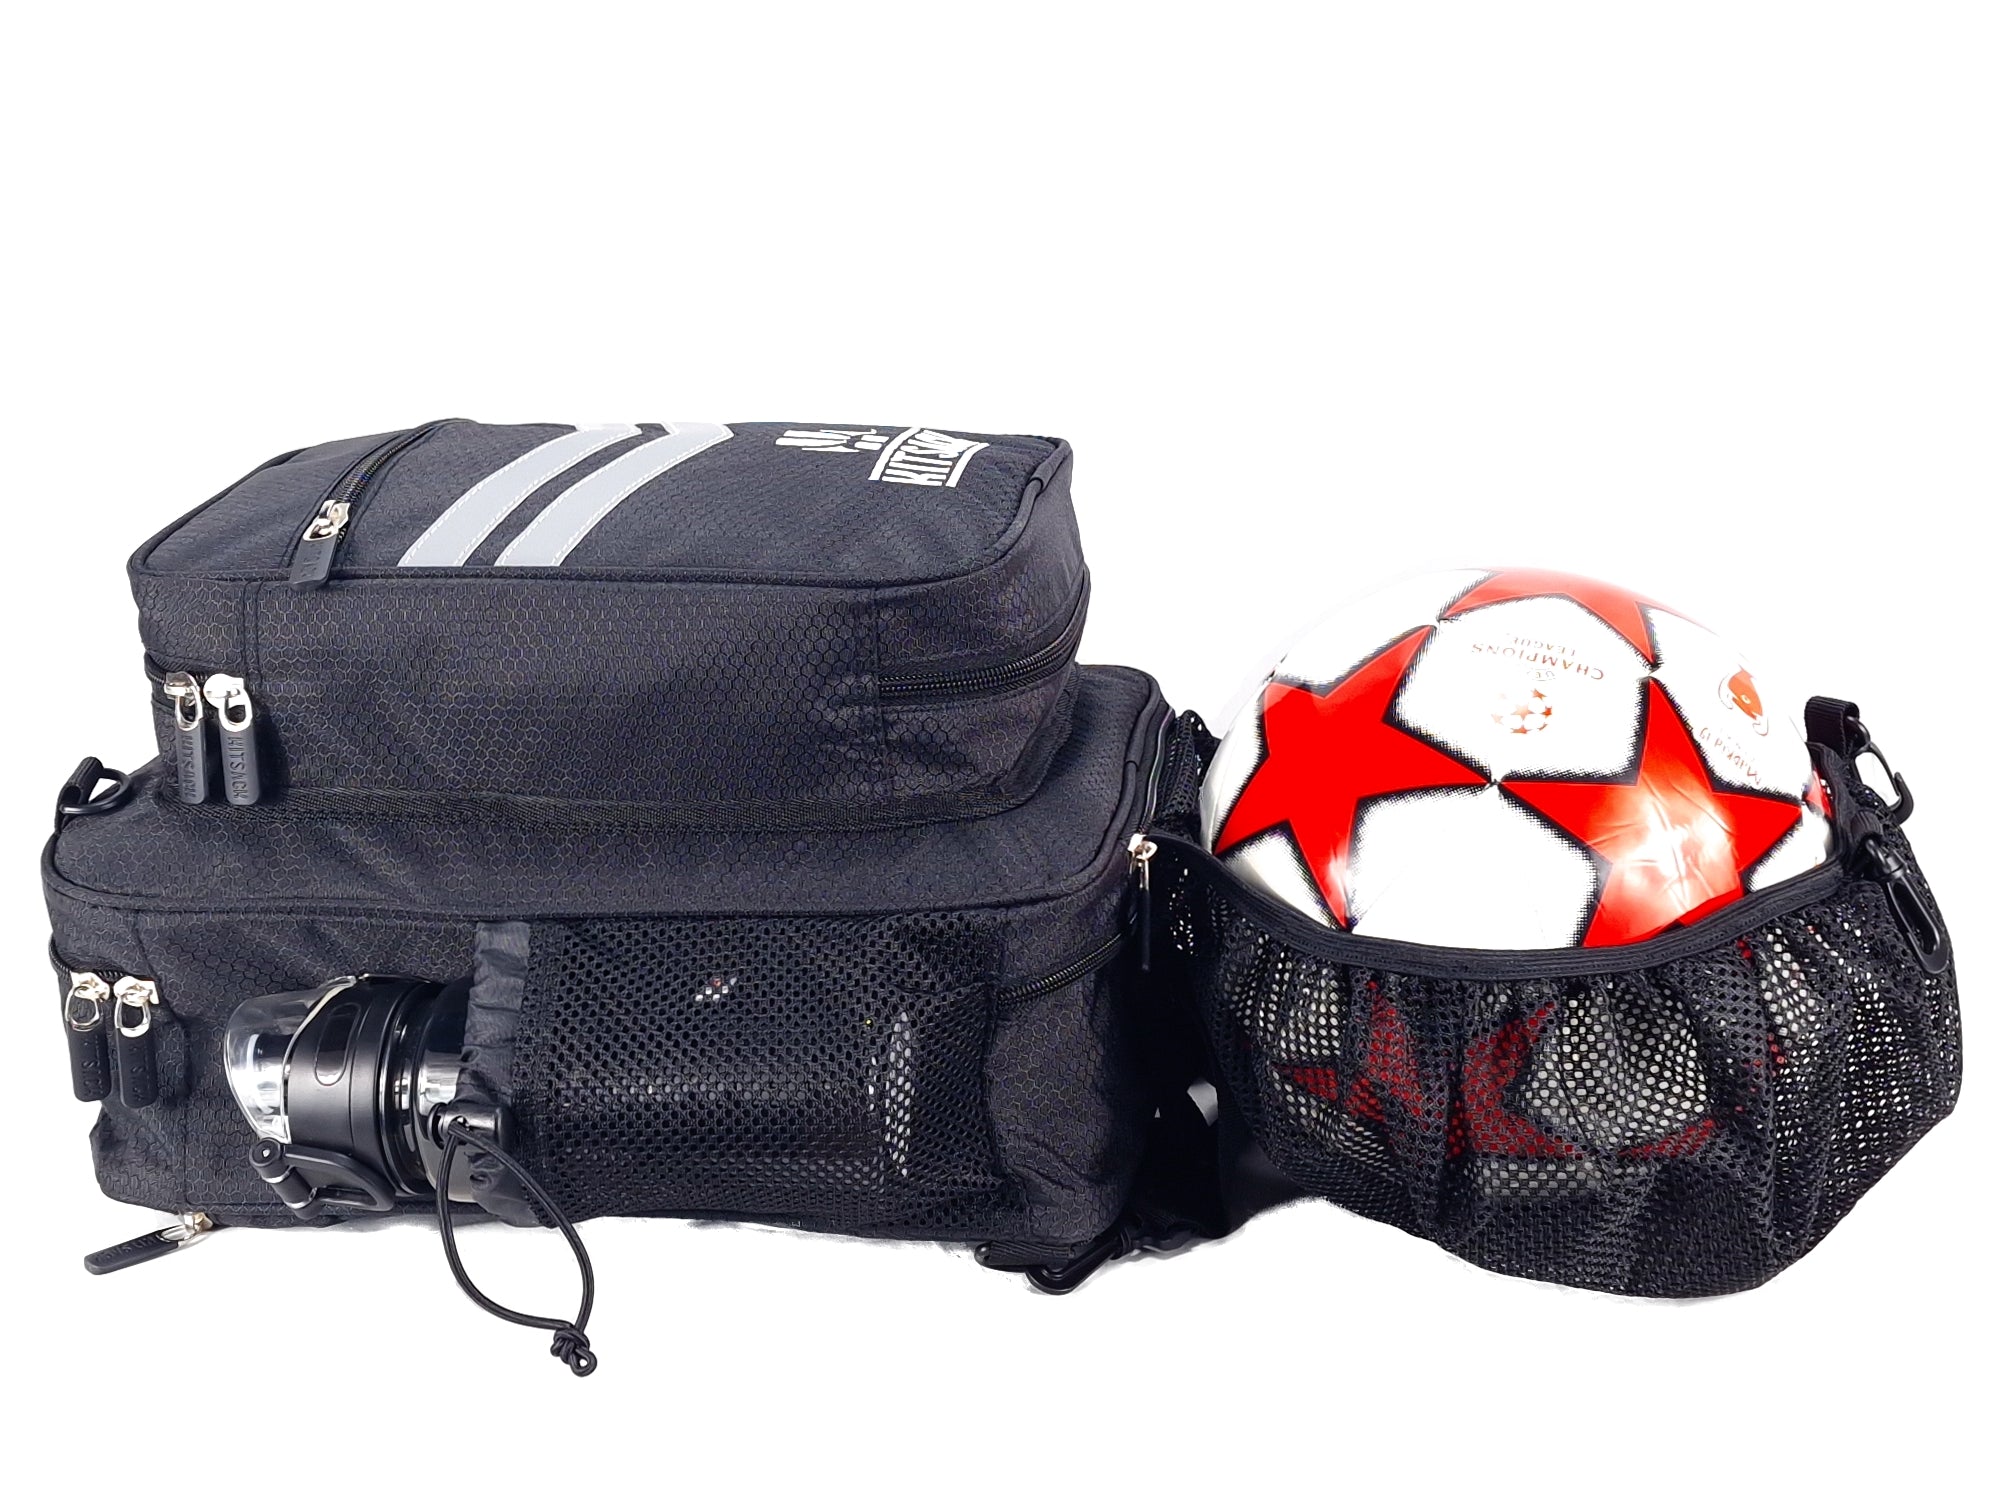 KITSACK XL Football and Rugby training bag, carry your boots, gloves, shin pads, ball and all your training gear in one bag…